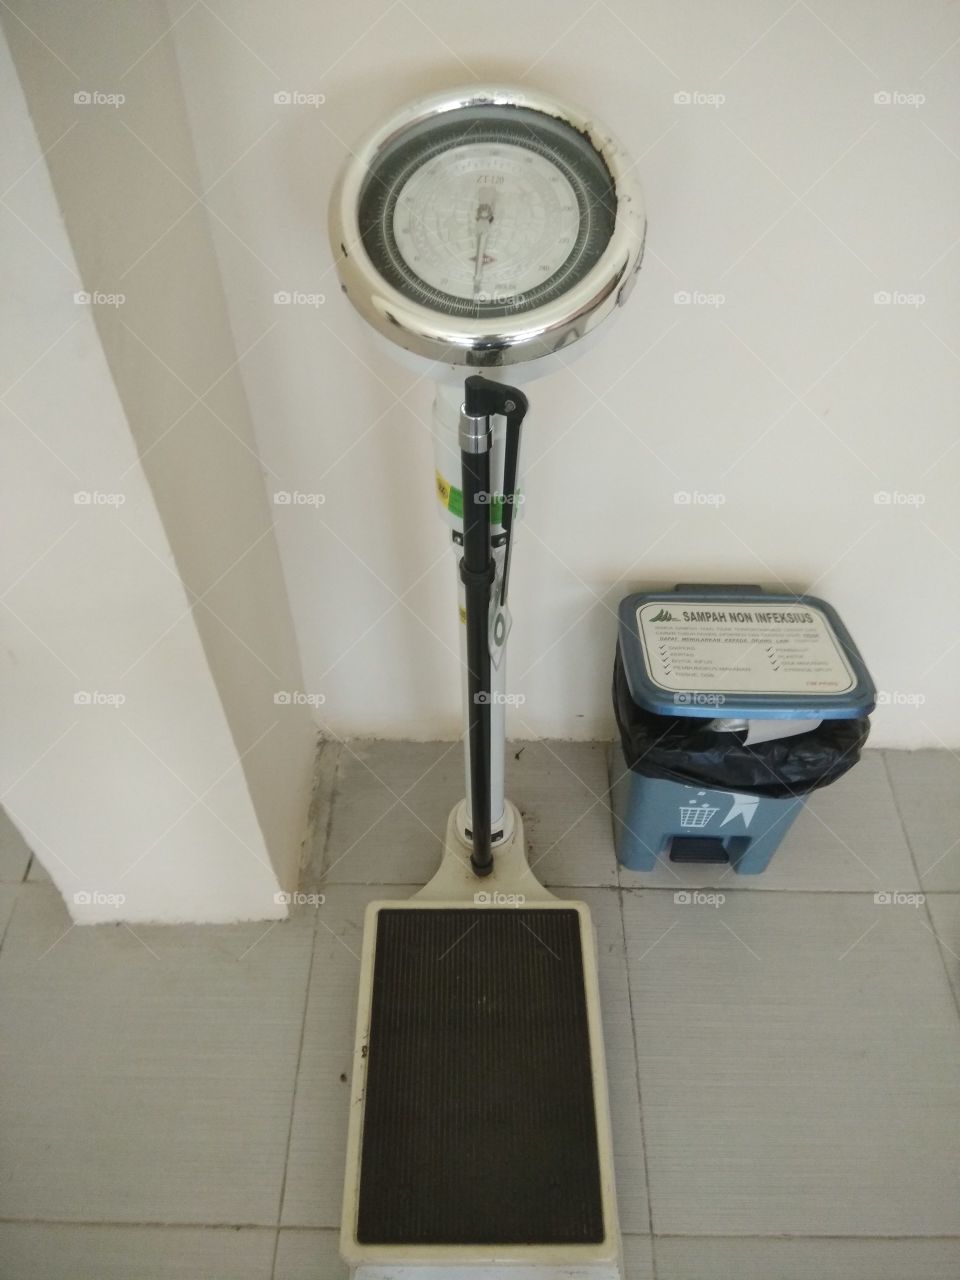 weight measurements. near it there is rubbish box